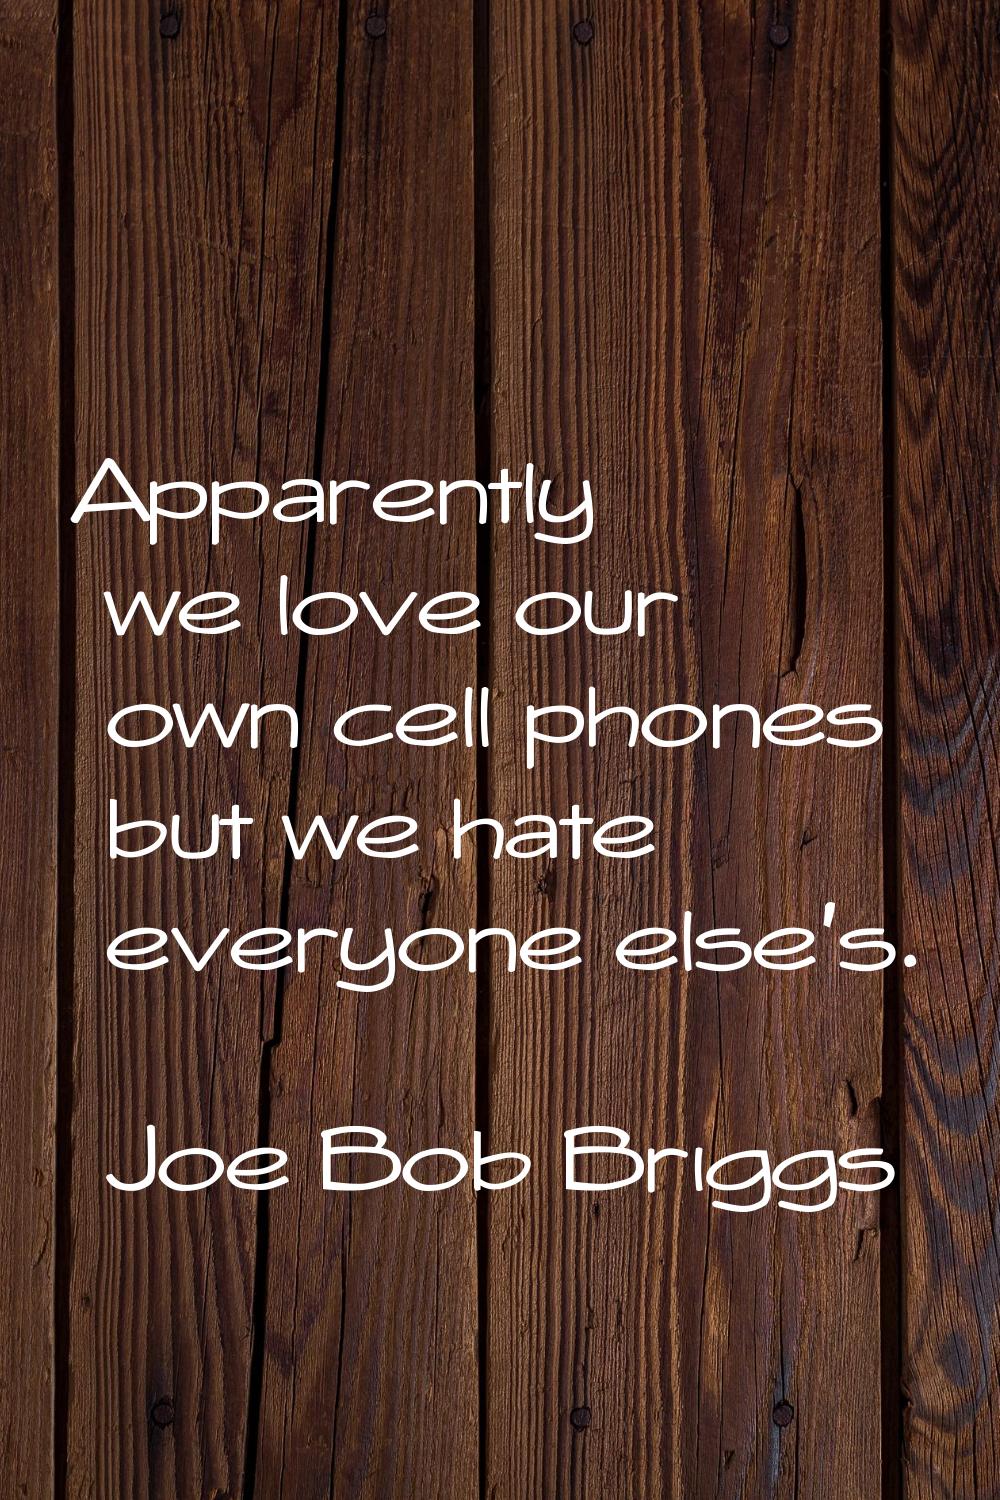 Apparently we love our own cell phones but we hate everyone else's.